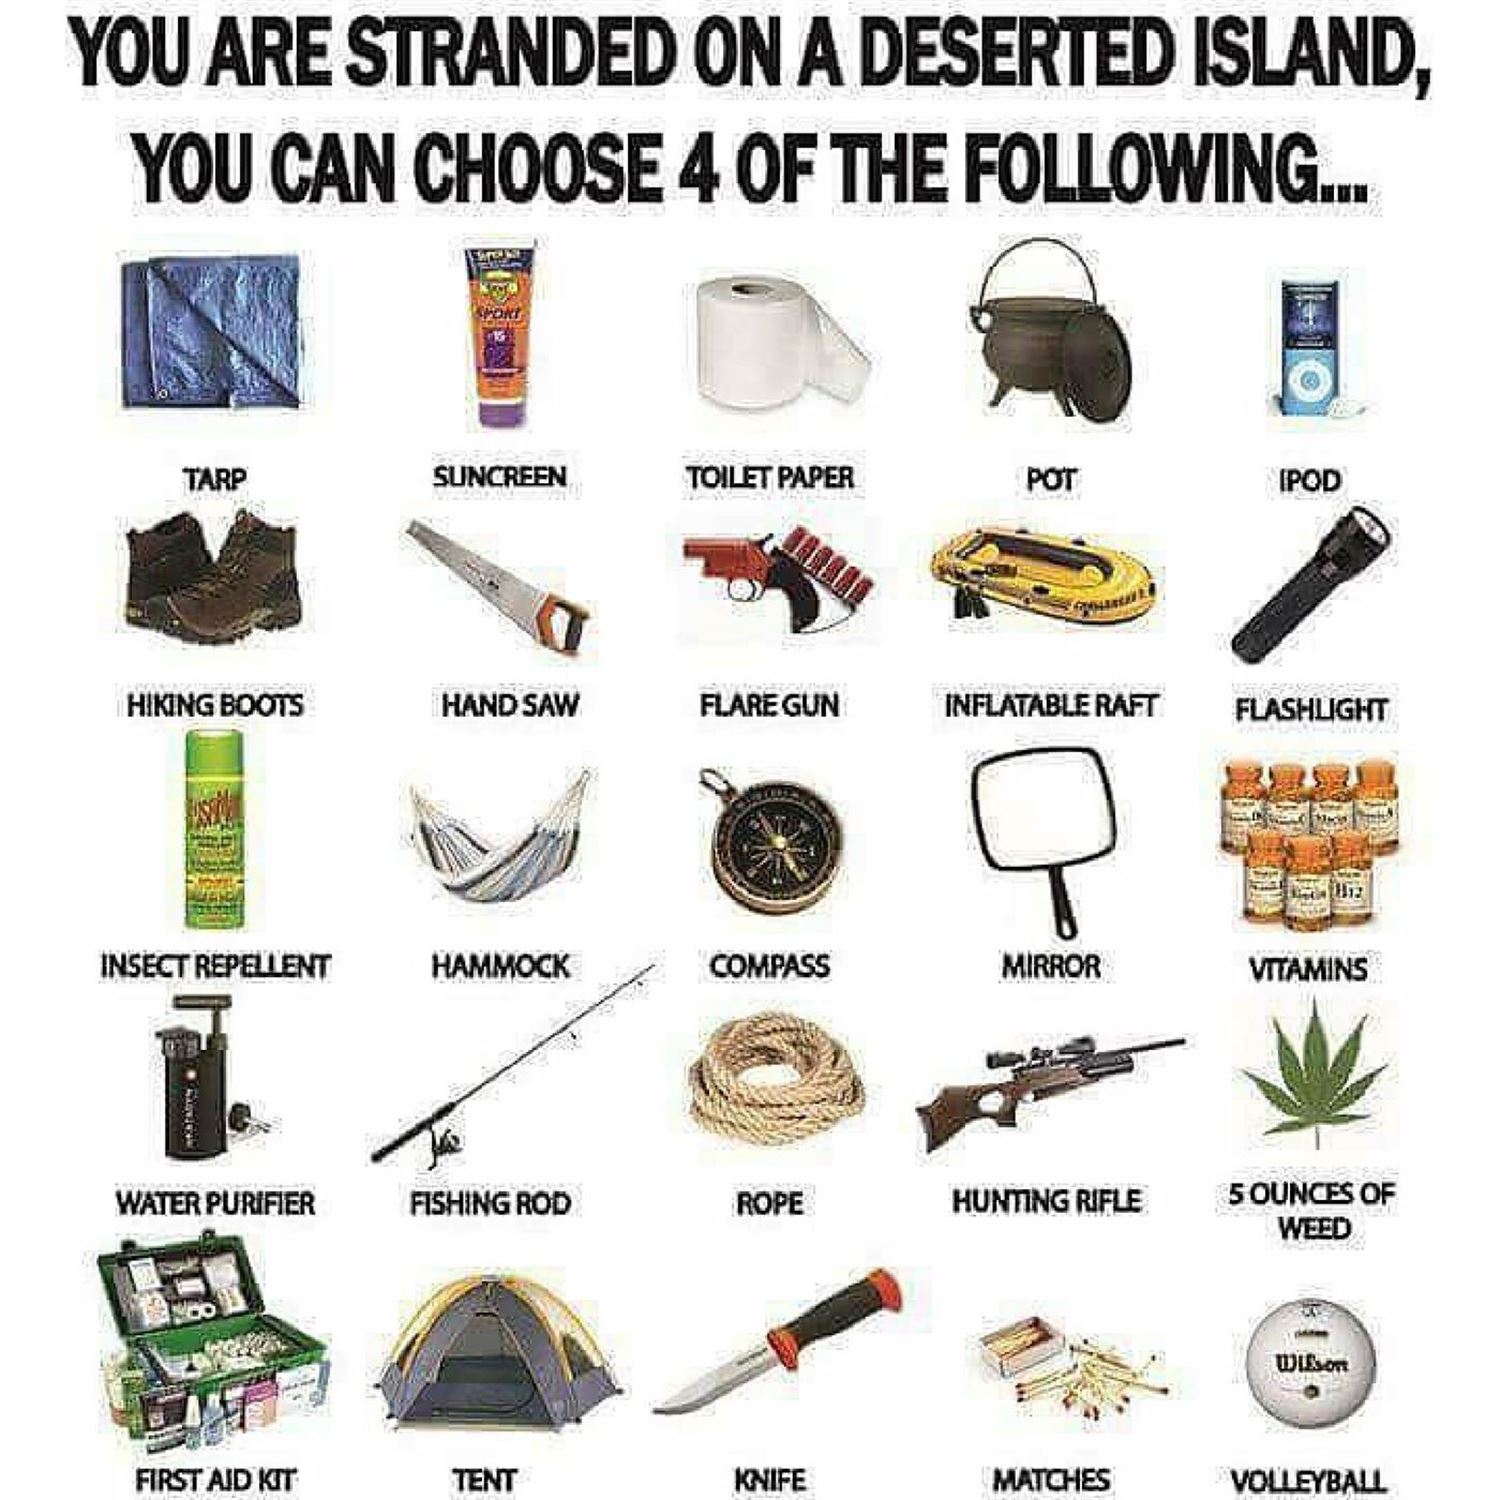 3 things on a deserted island